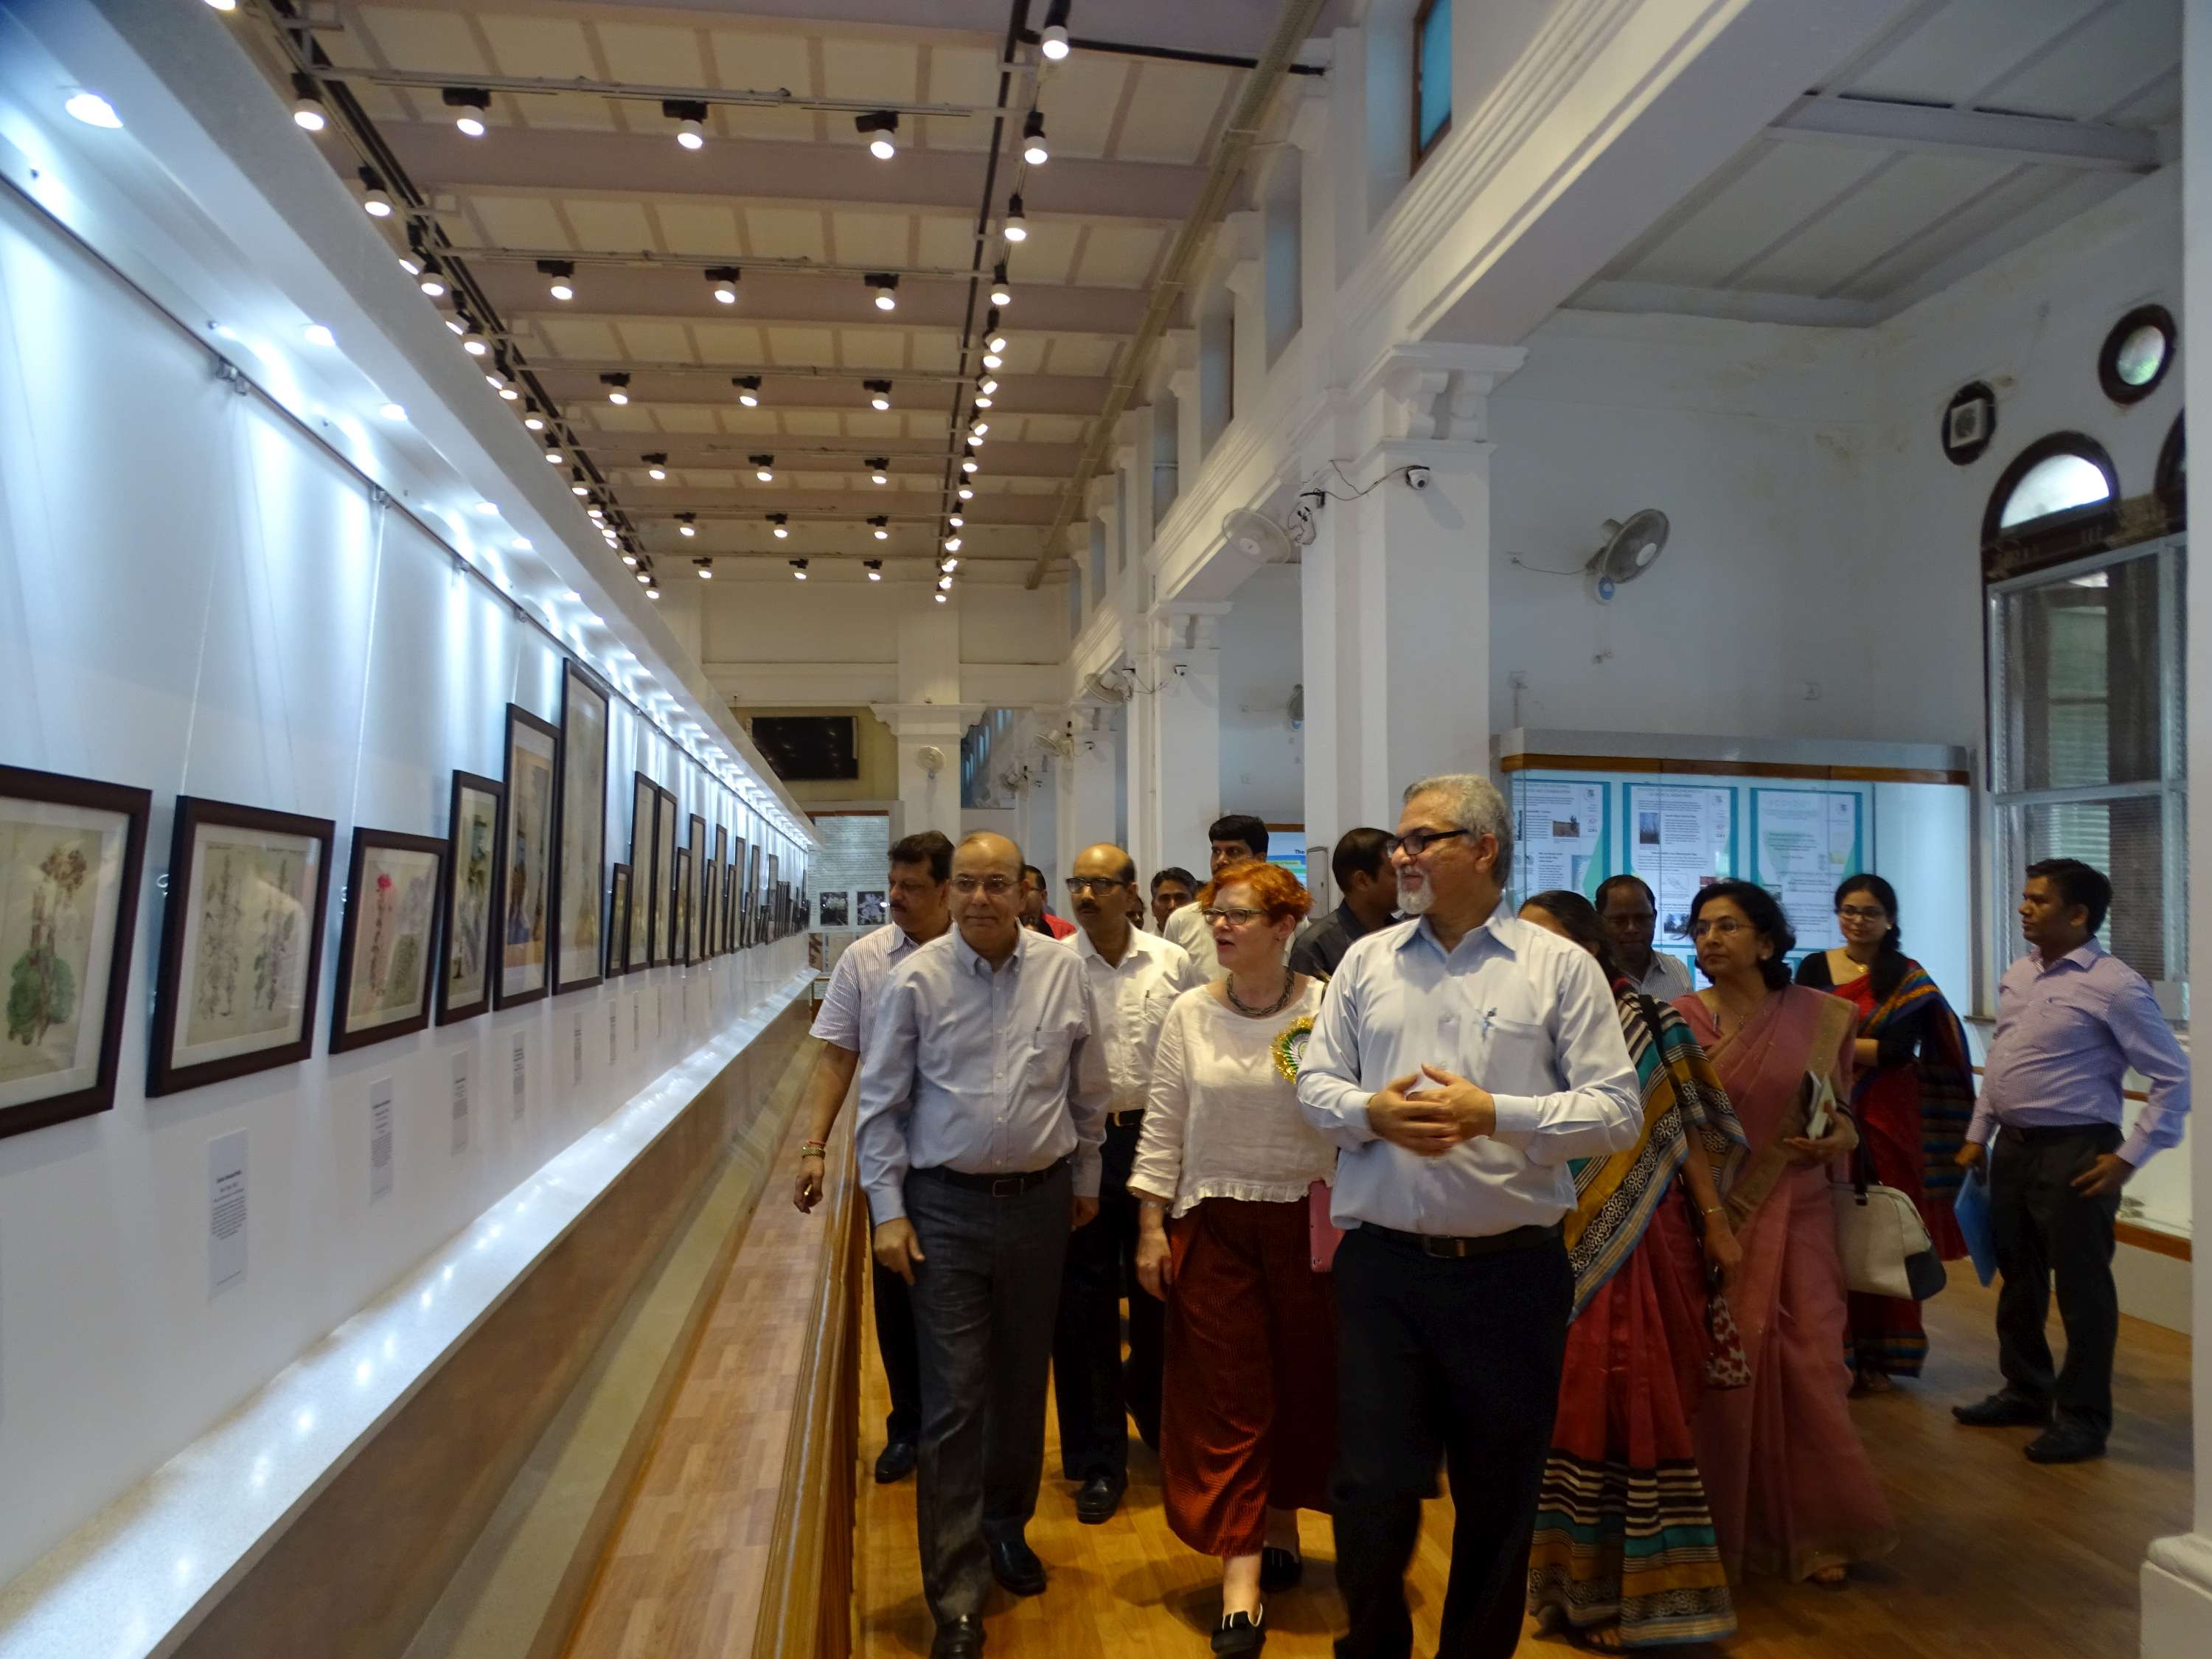 Visit of the Secretary, MOEF&CC to Botanical Gallery in Indian Museum, Kolkata on 01.10.2016